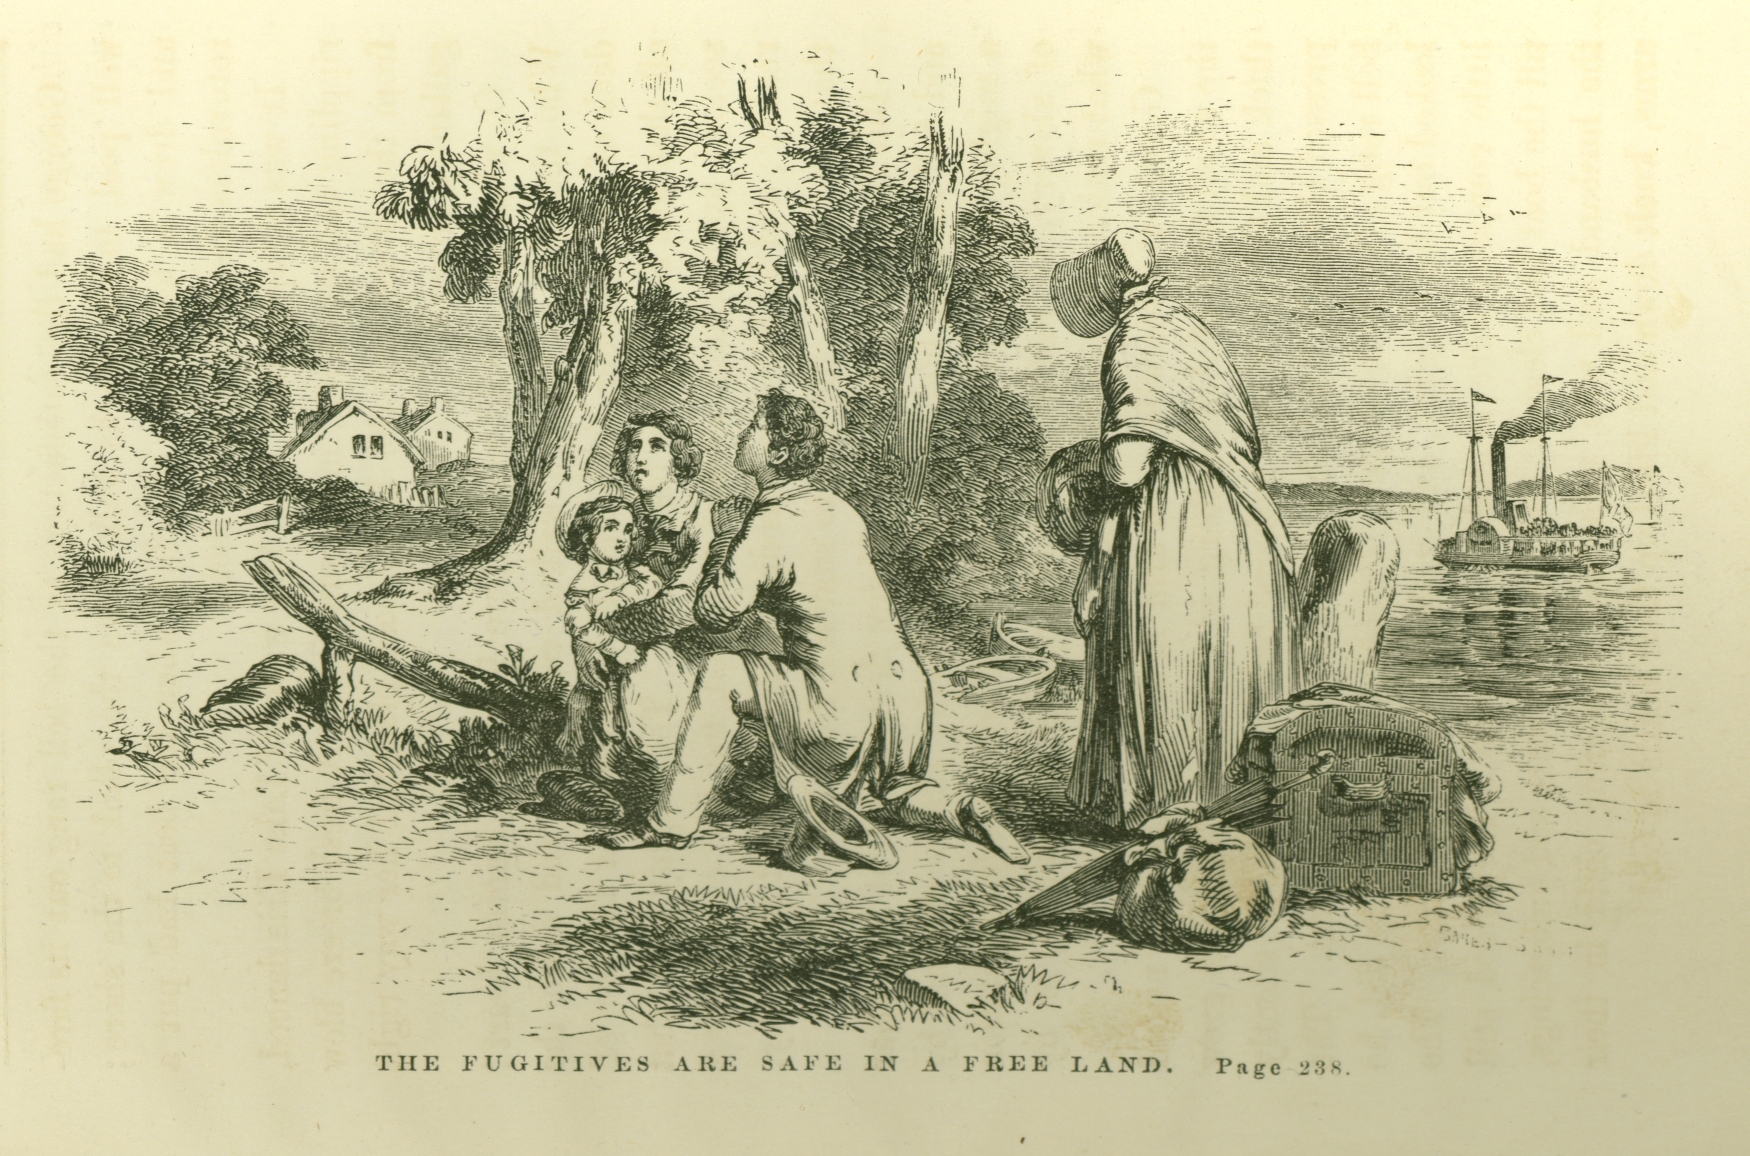 Hammatt Billings, The Fugitives are Safe in a Free Land, 1852, engraving, from Harriet Beecher Stowe. Uncle Tom's Cabin; or, Life Among the Lowly, Boston: John P. Jewett & Company, 1852, p. 238 (Newberry Library)